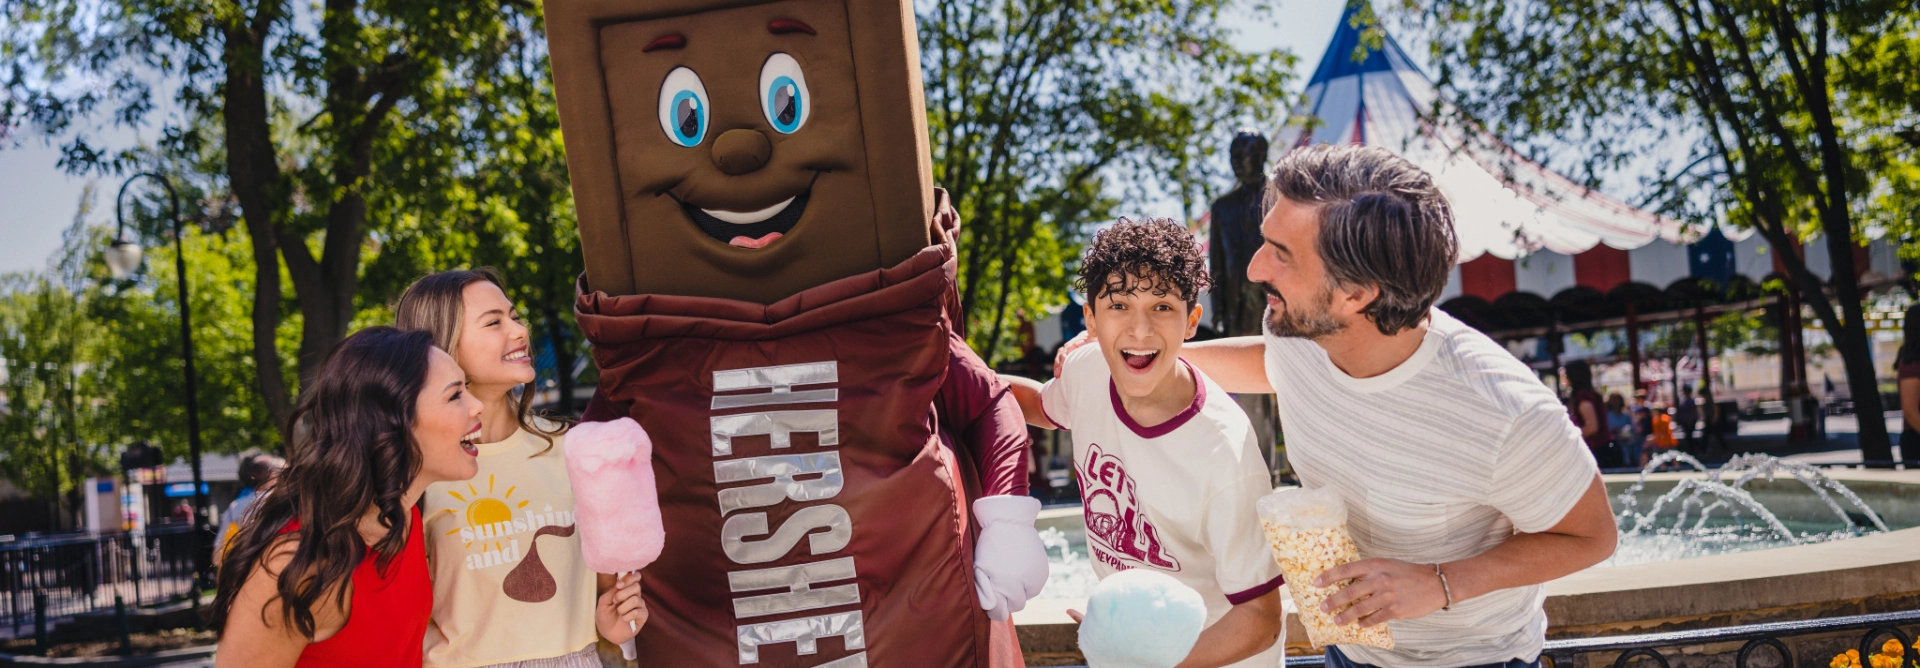 a family hanging out with the hershey mascots 